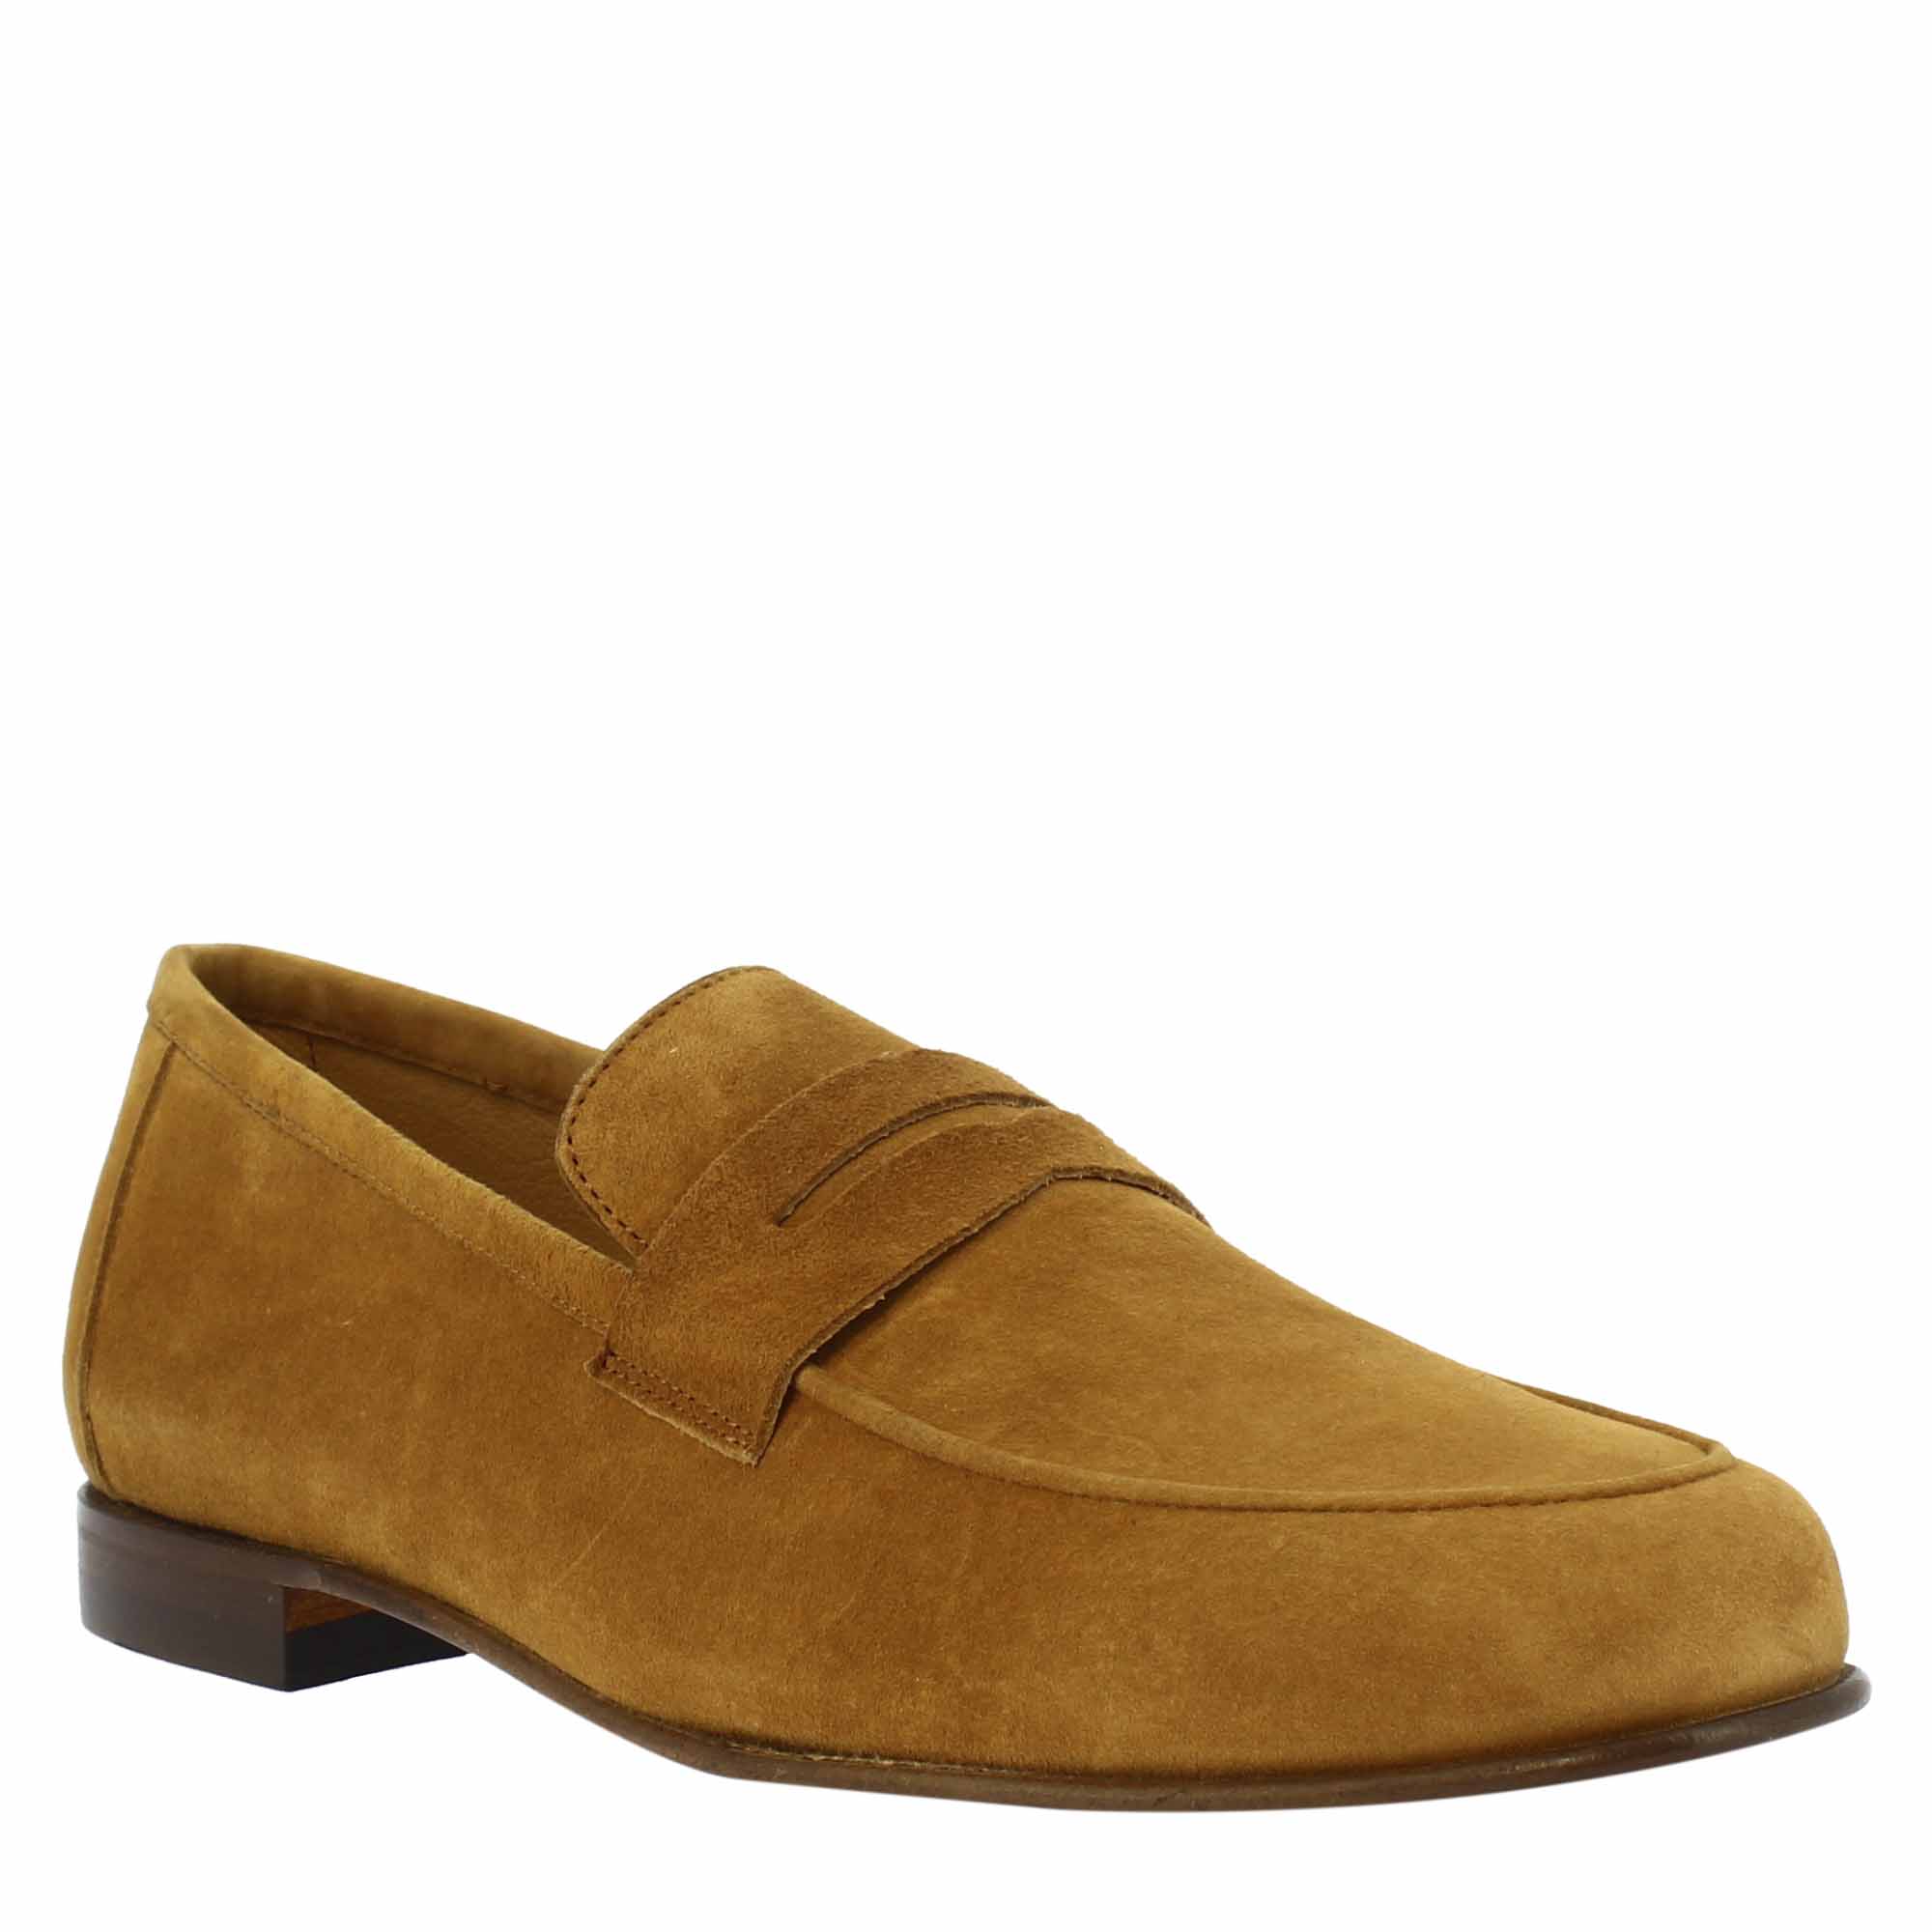 slip-on loafers in brown suede leather